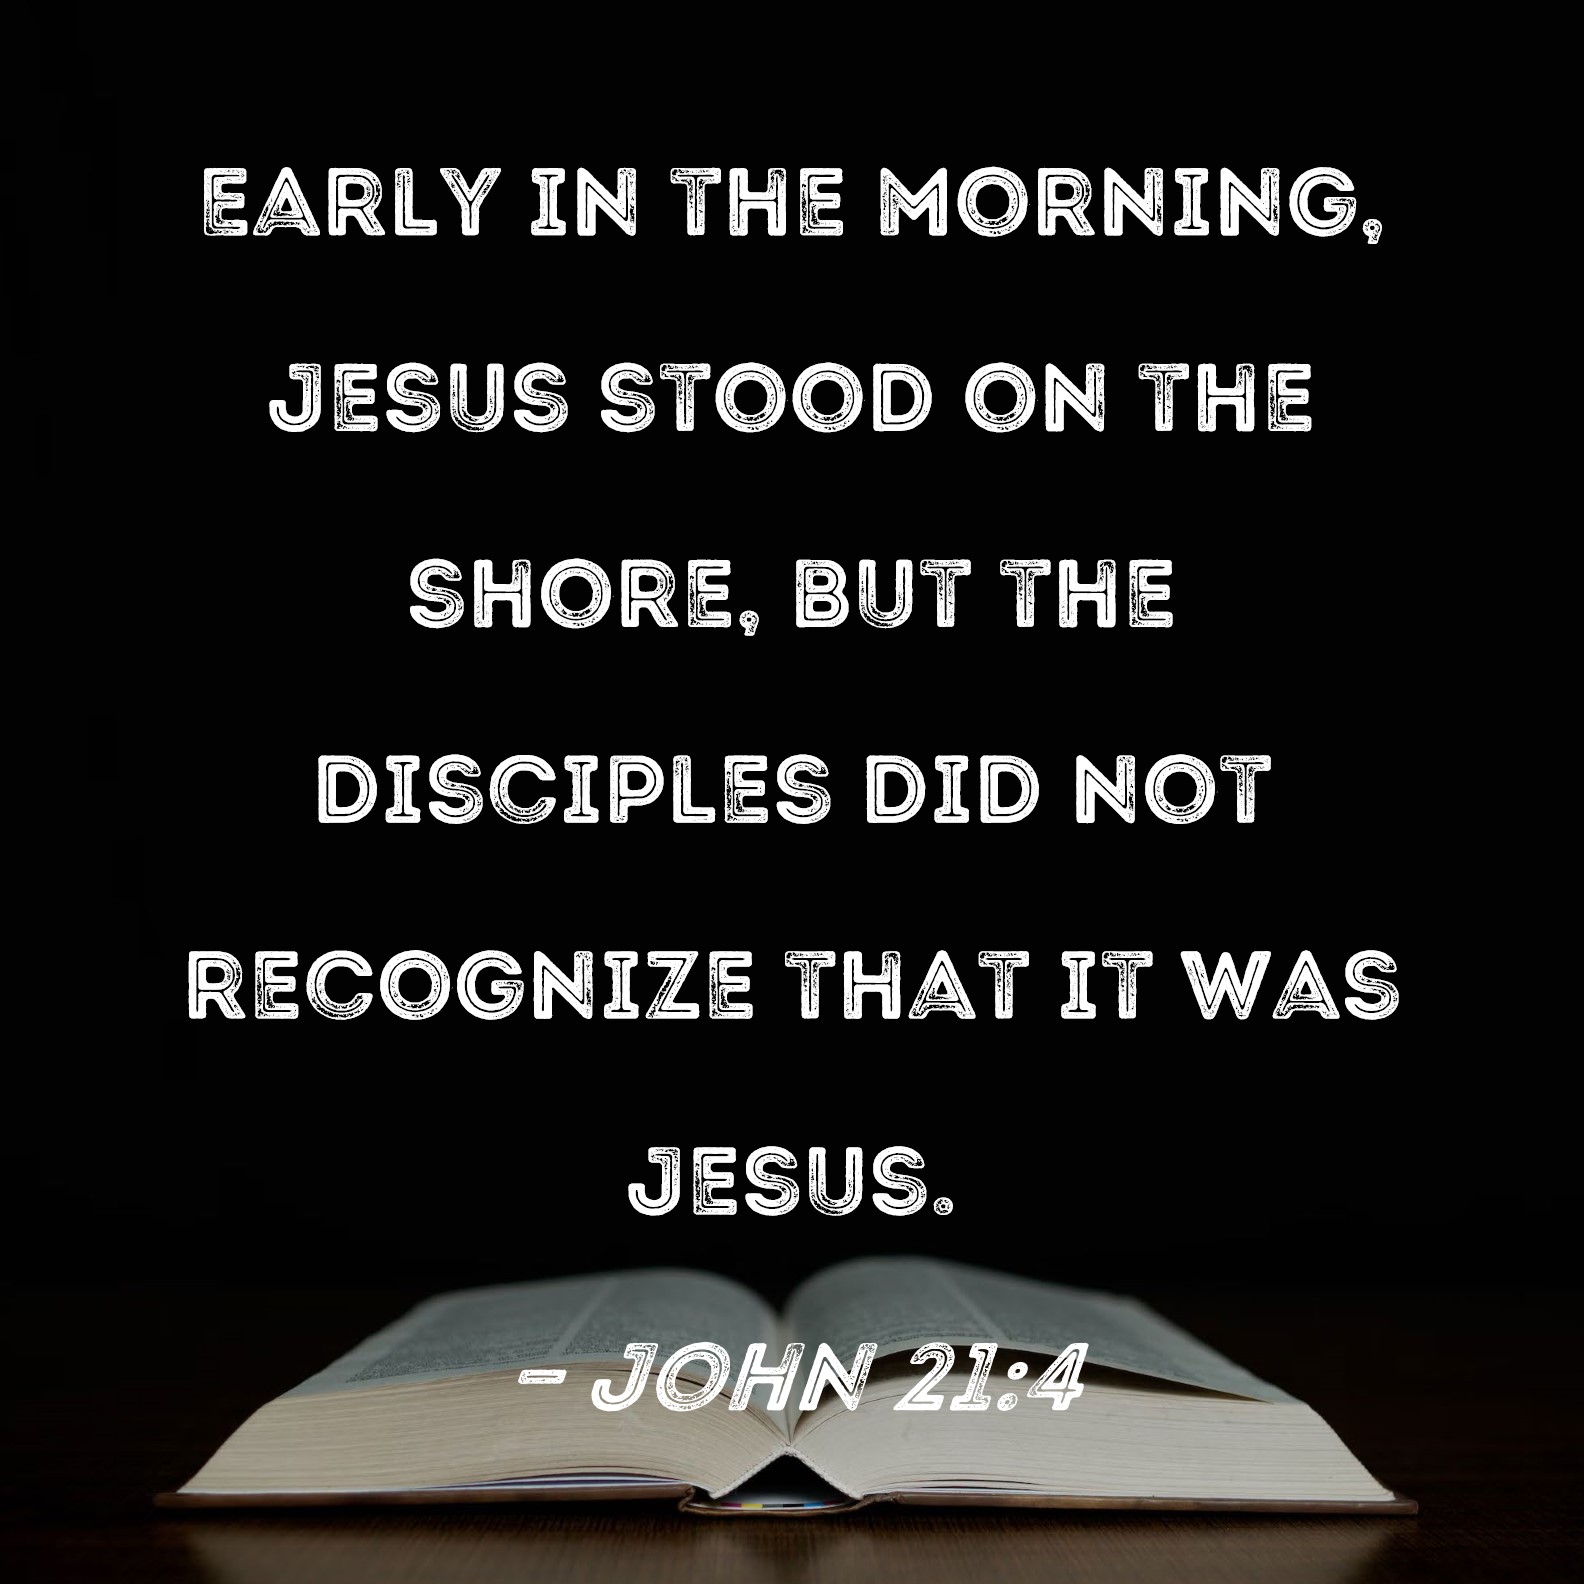 john-21-4-early-in-the-morning-jesus-stood-on-the-shore-but-the